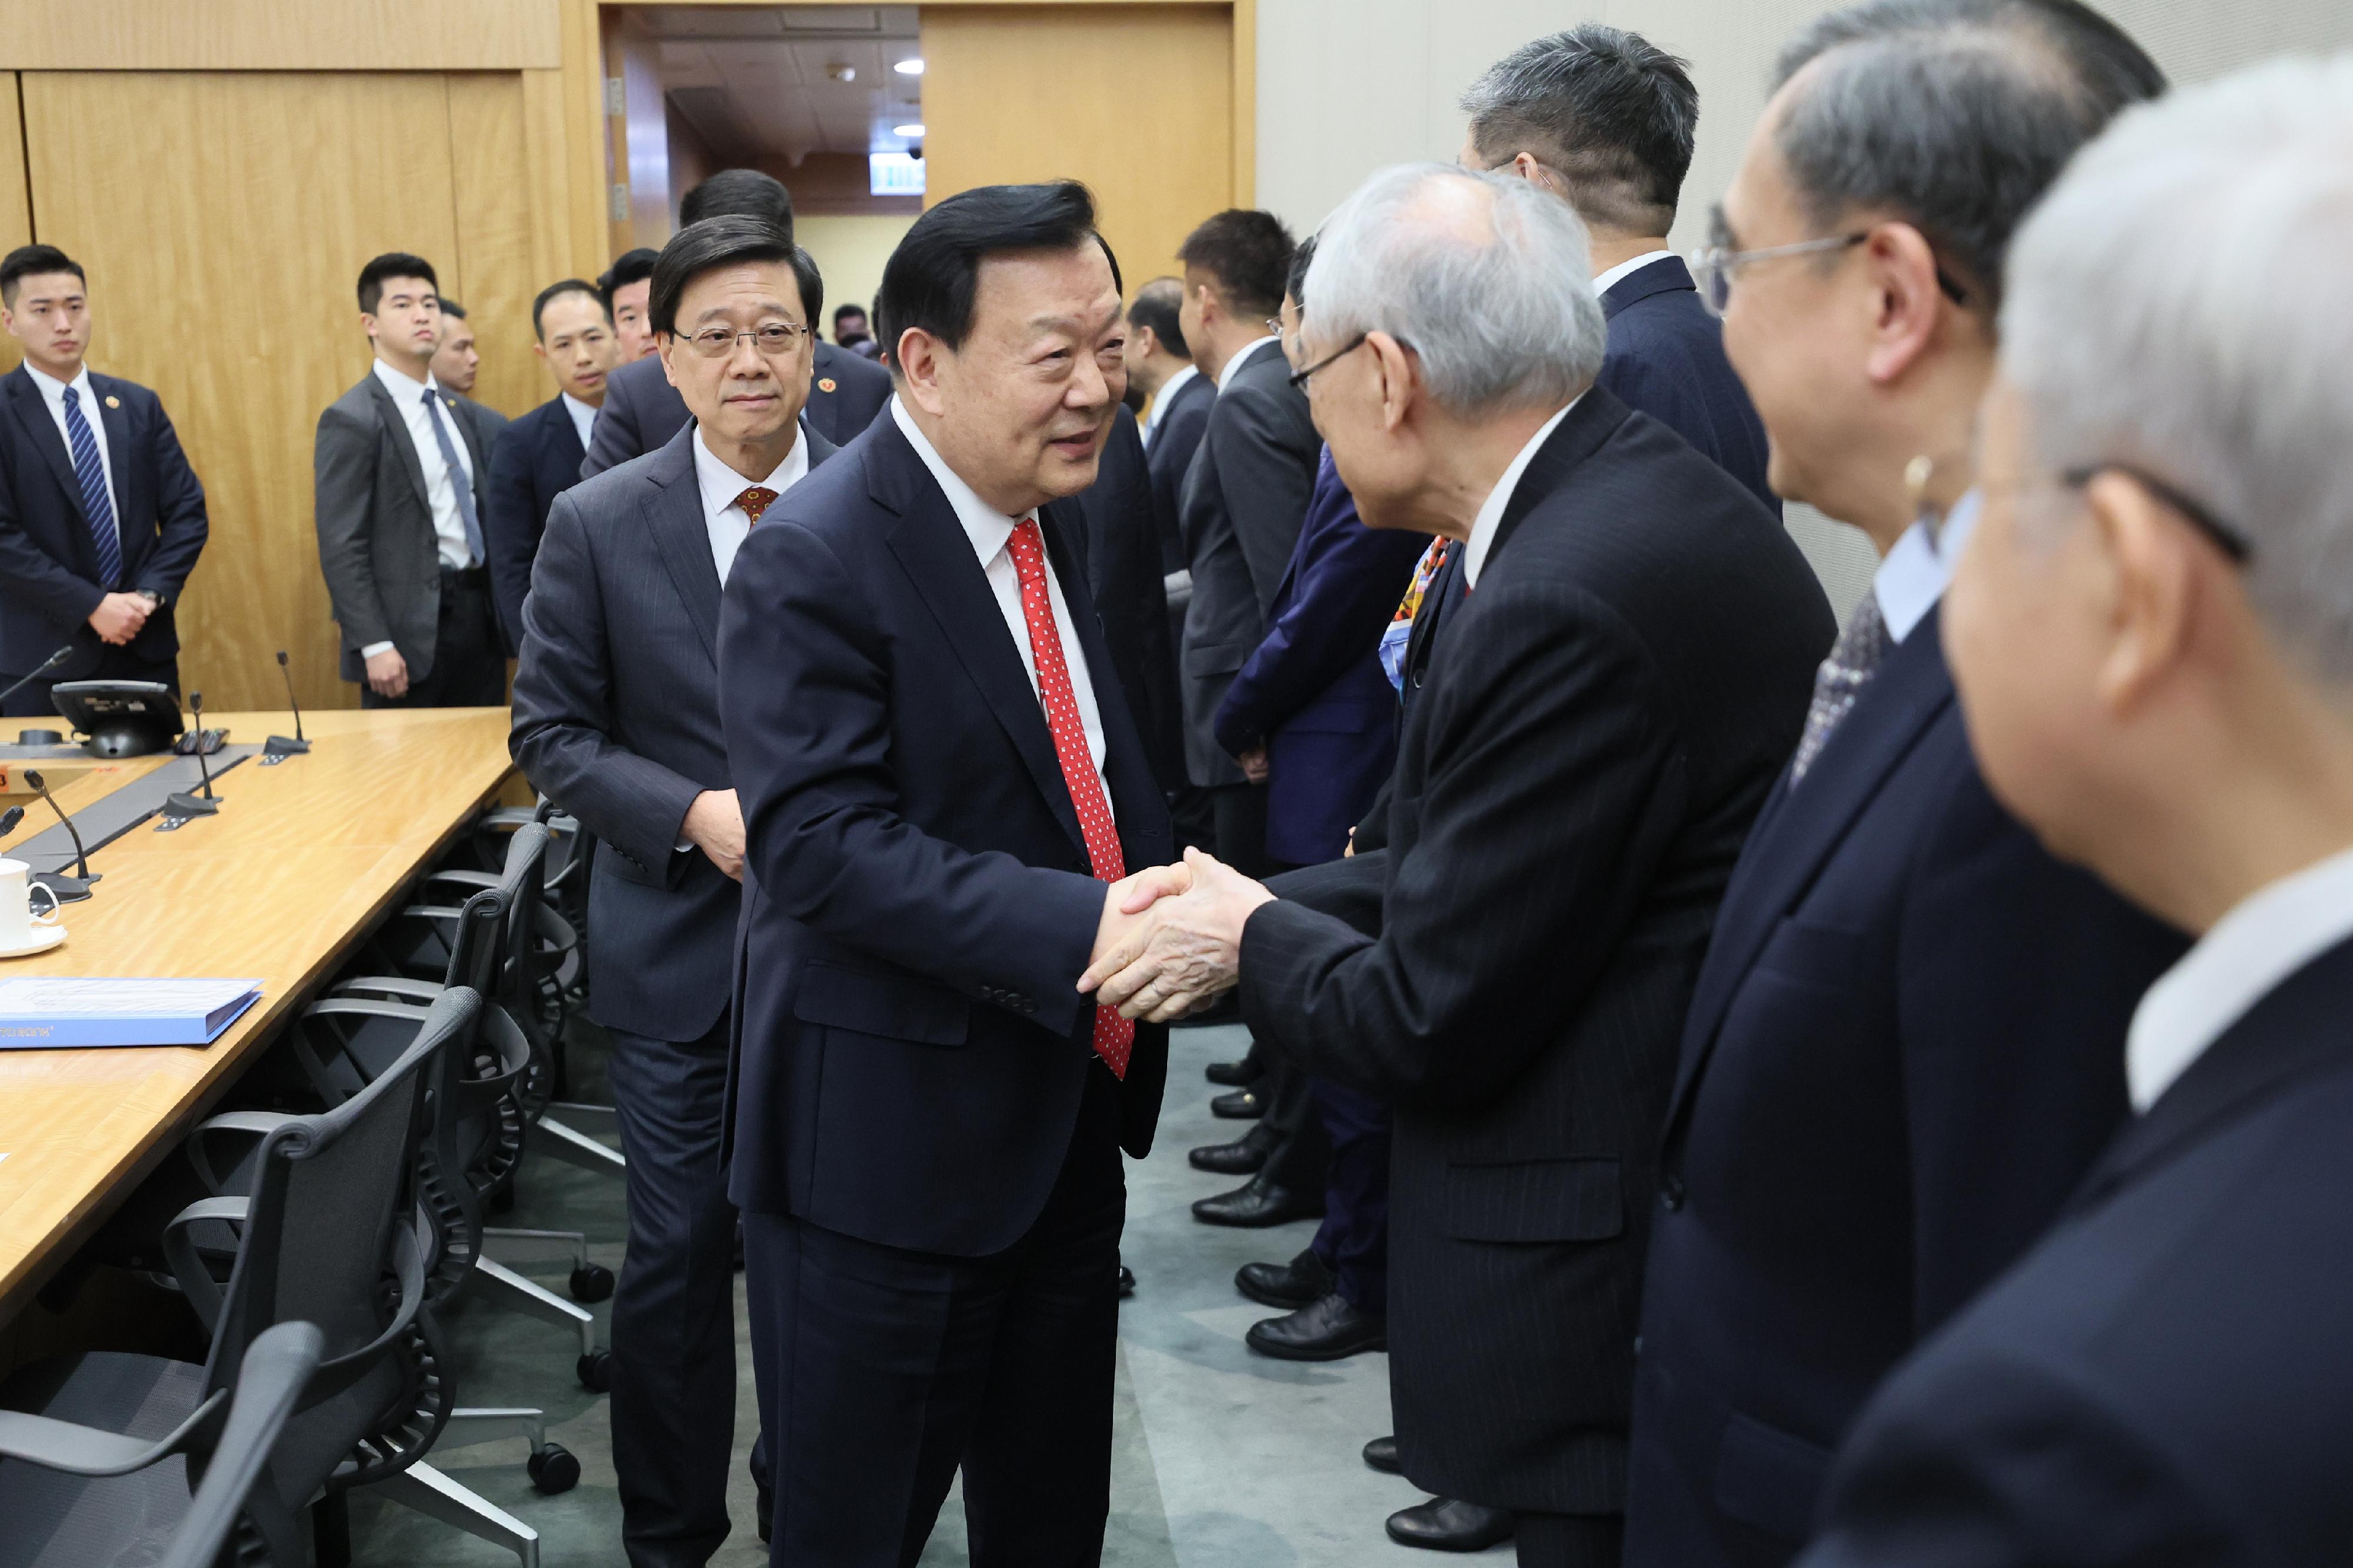 The Director of the Hong Kong and Macao Work Office of the Communist Party of China Central Committee and the Hong Kong and Macao Affairs Office of the State Council, Mr Xia Baolong, today (February 27) continued his inspection visit to Hong Kong. Photo shows Mr Xia (second left), accompanied by the Chief Executive, Mr John Lee (first left), having an exchange session with some economists to share views on economic development strategies of Hong Kong.